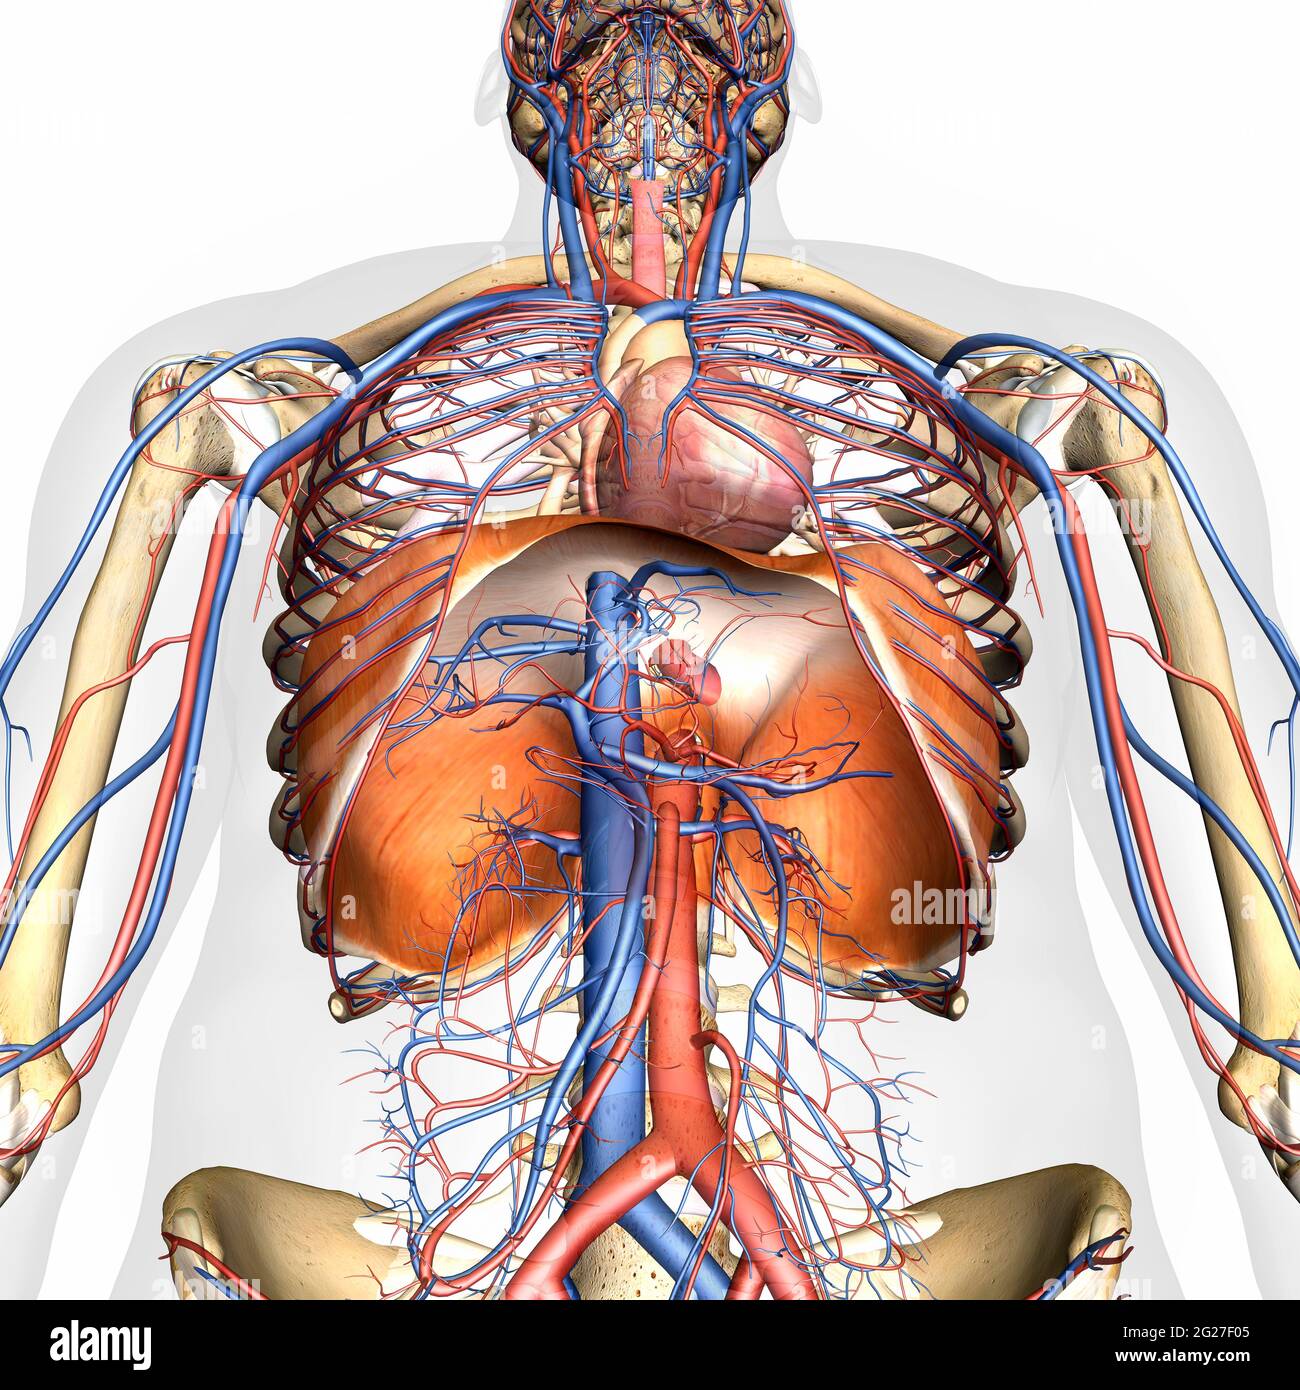 3D rendering of diaphragm anatomy with circulatory system, on